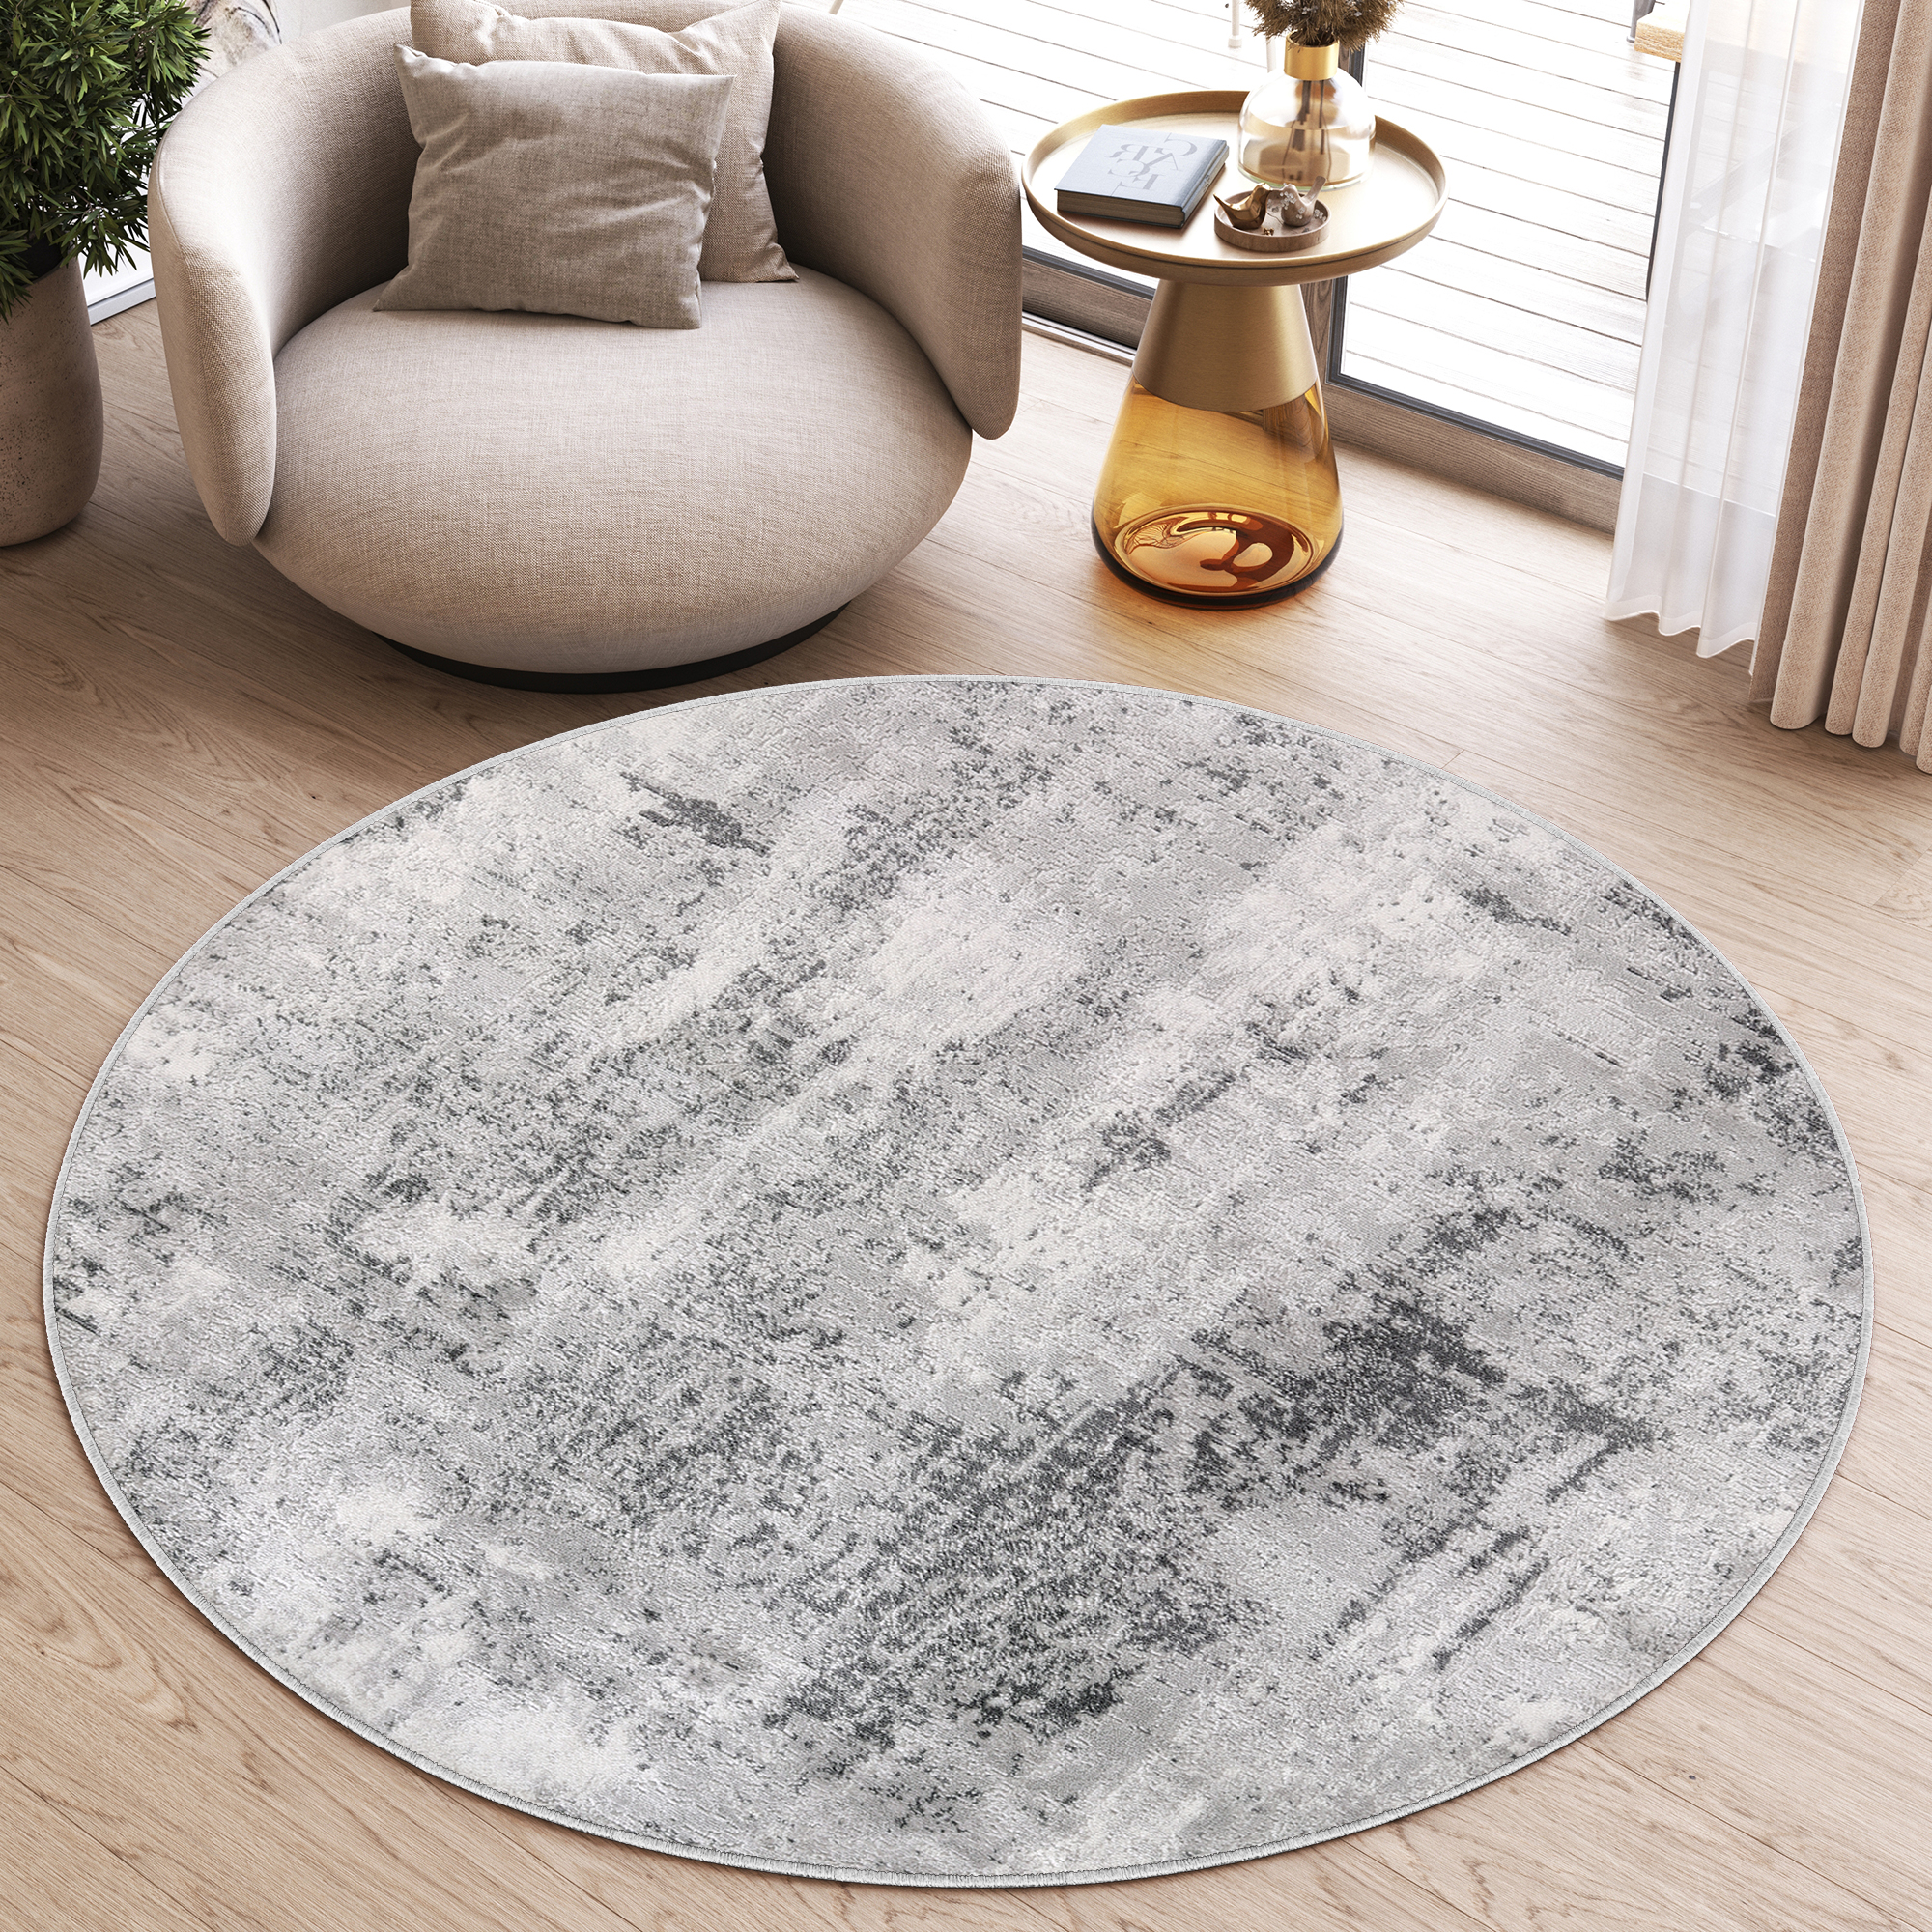 Area Rug Sky Round Grey Abstract Vintage Flecked